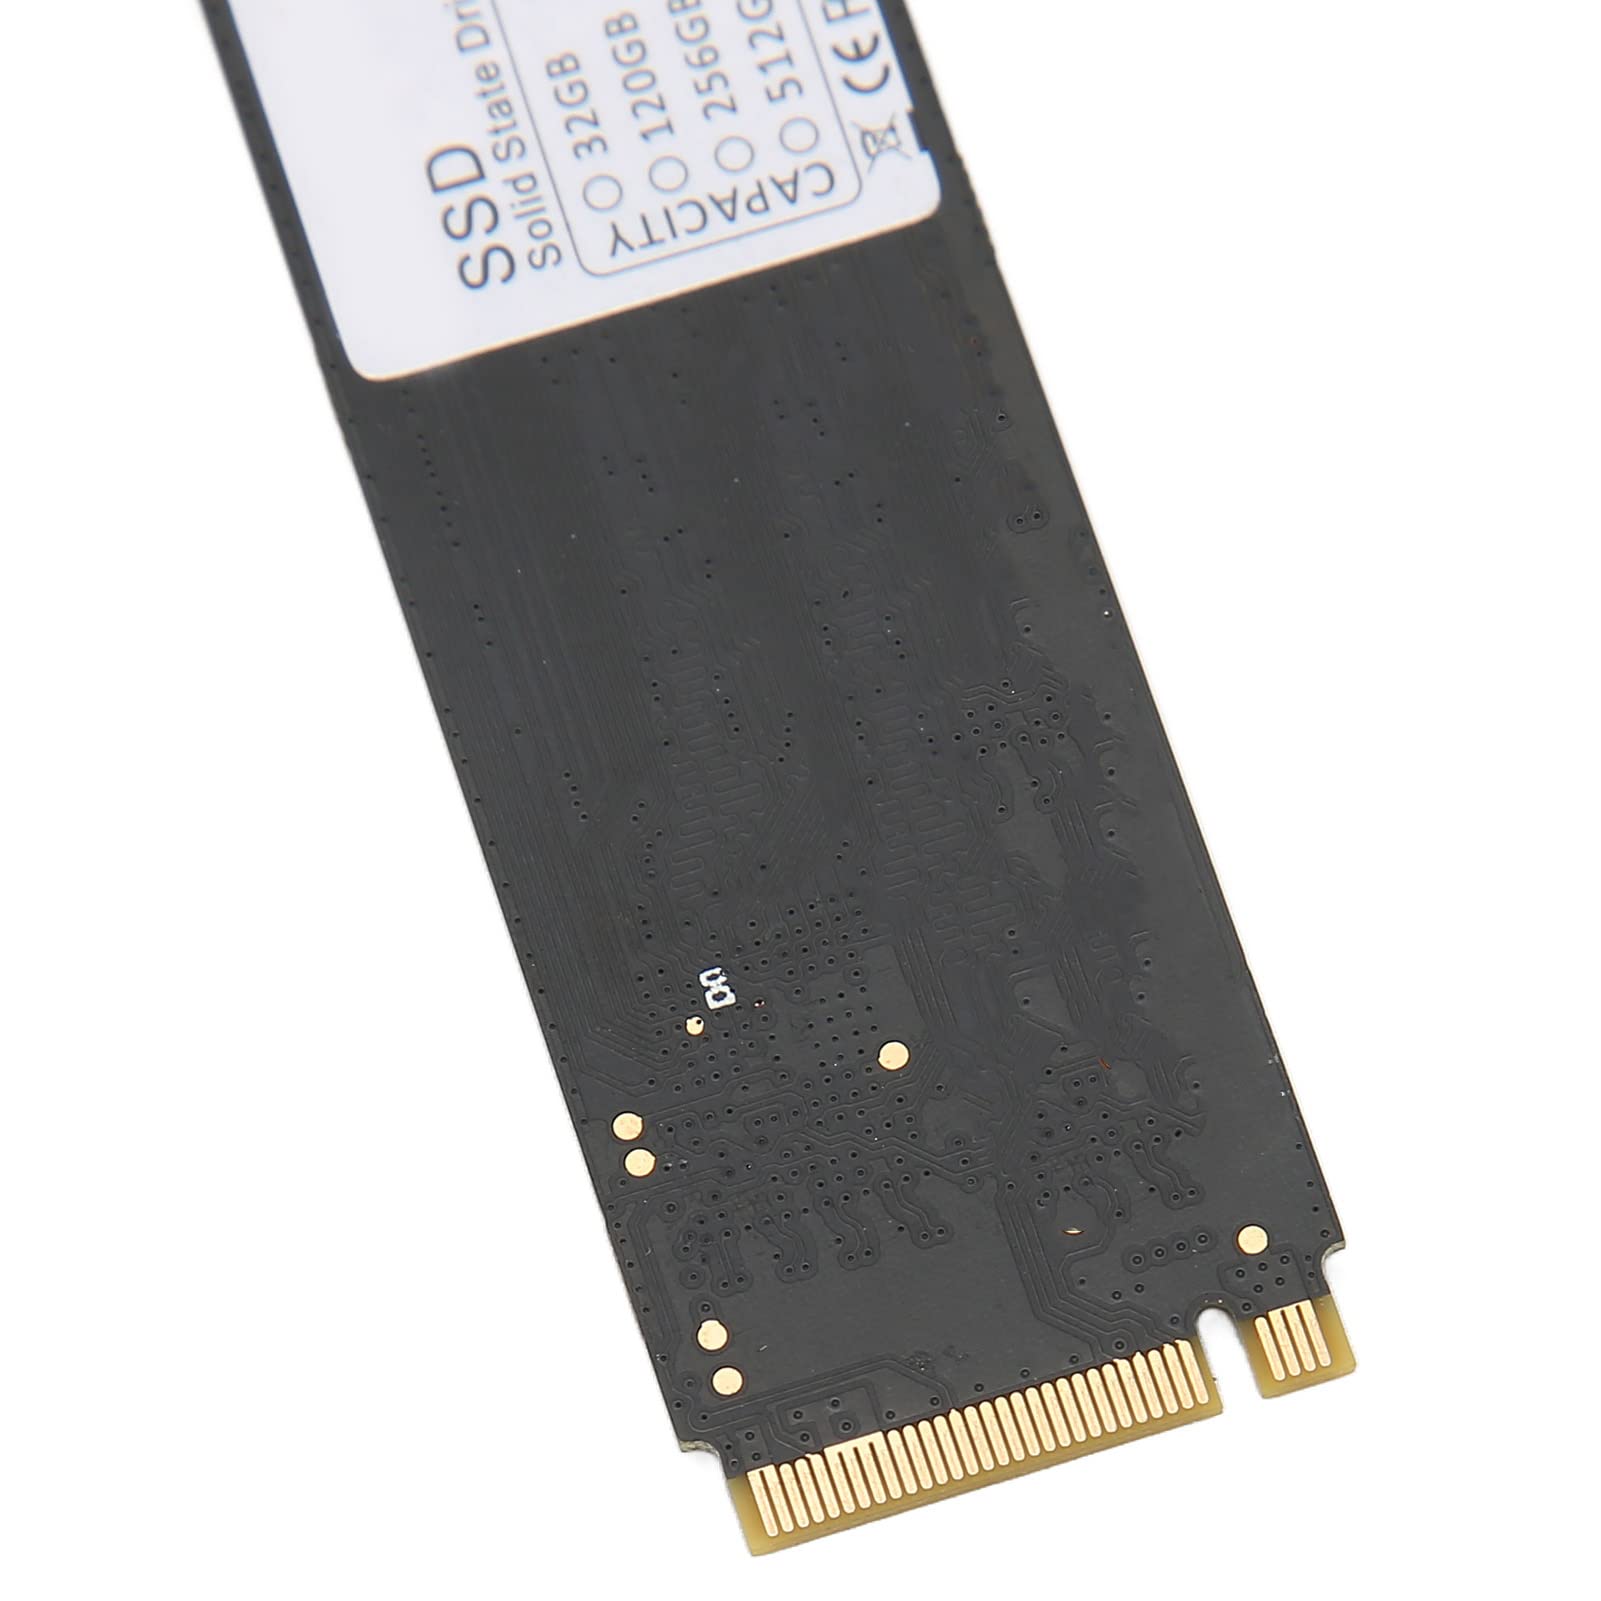 M.2 NVME SSD, High Speed Pcle Transfer Channel, High Impact Resistance, Low Power Consumption No Sound Anti Vibration, e Campaign Platform Standard Suitable for Computers(256GB)